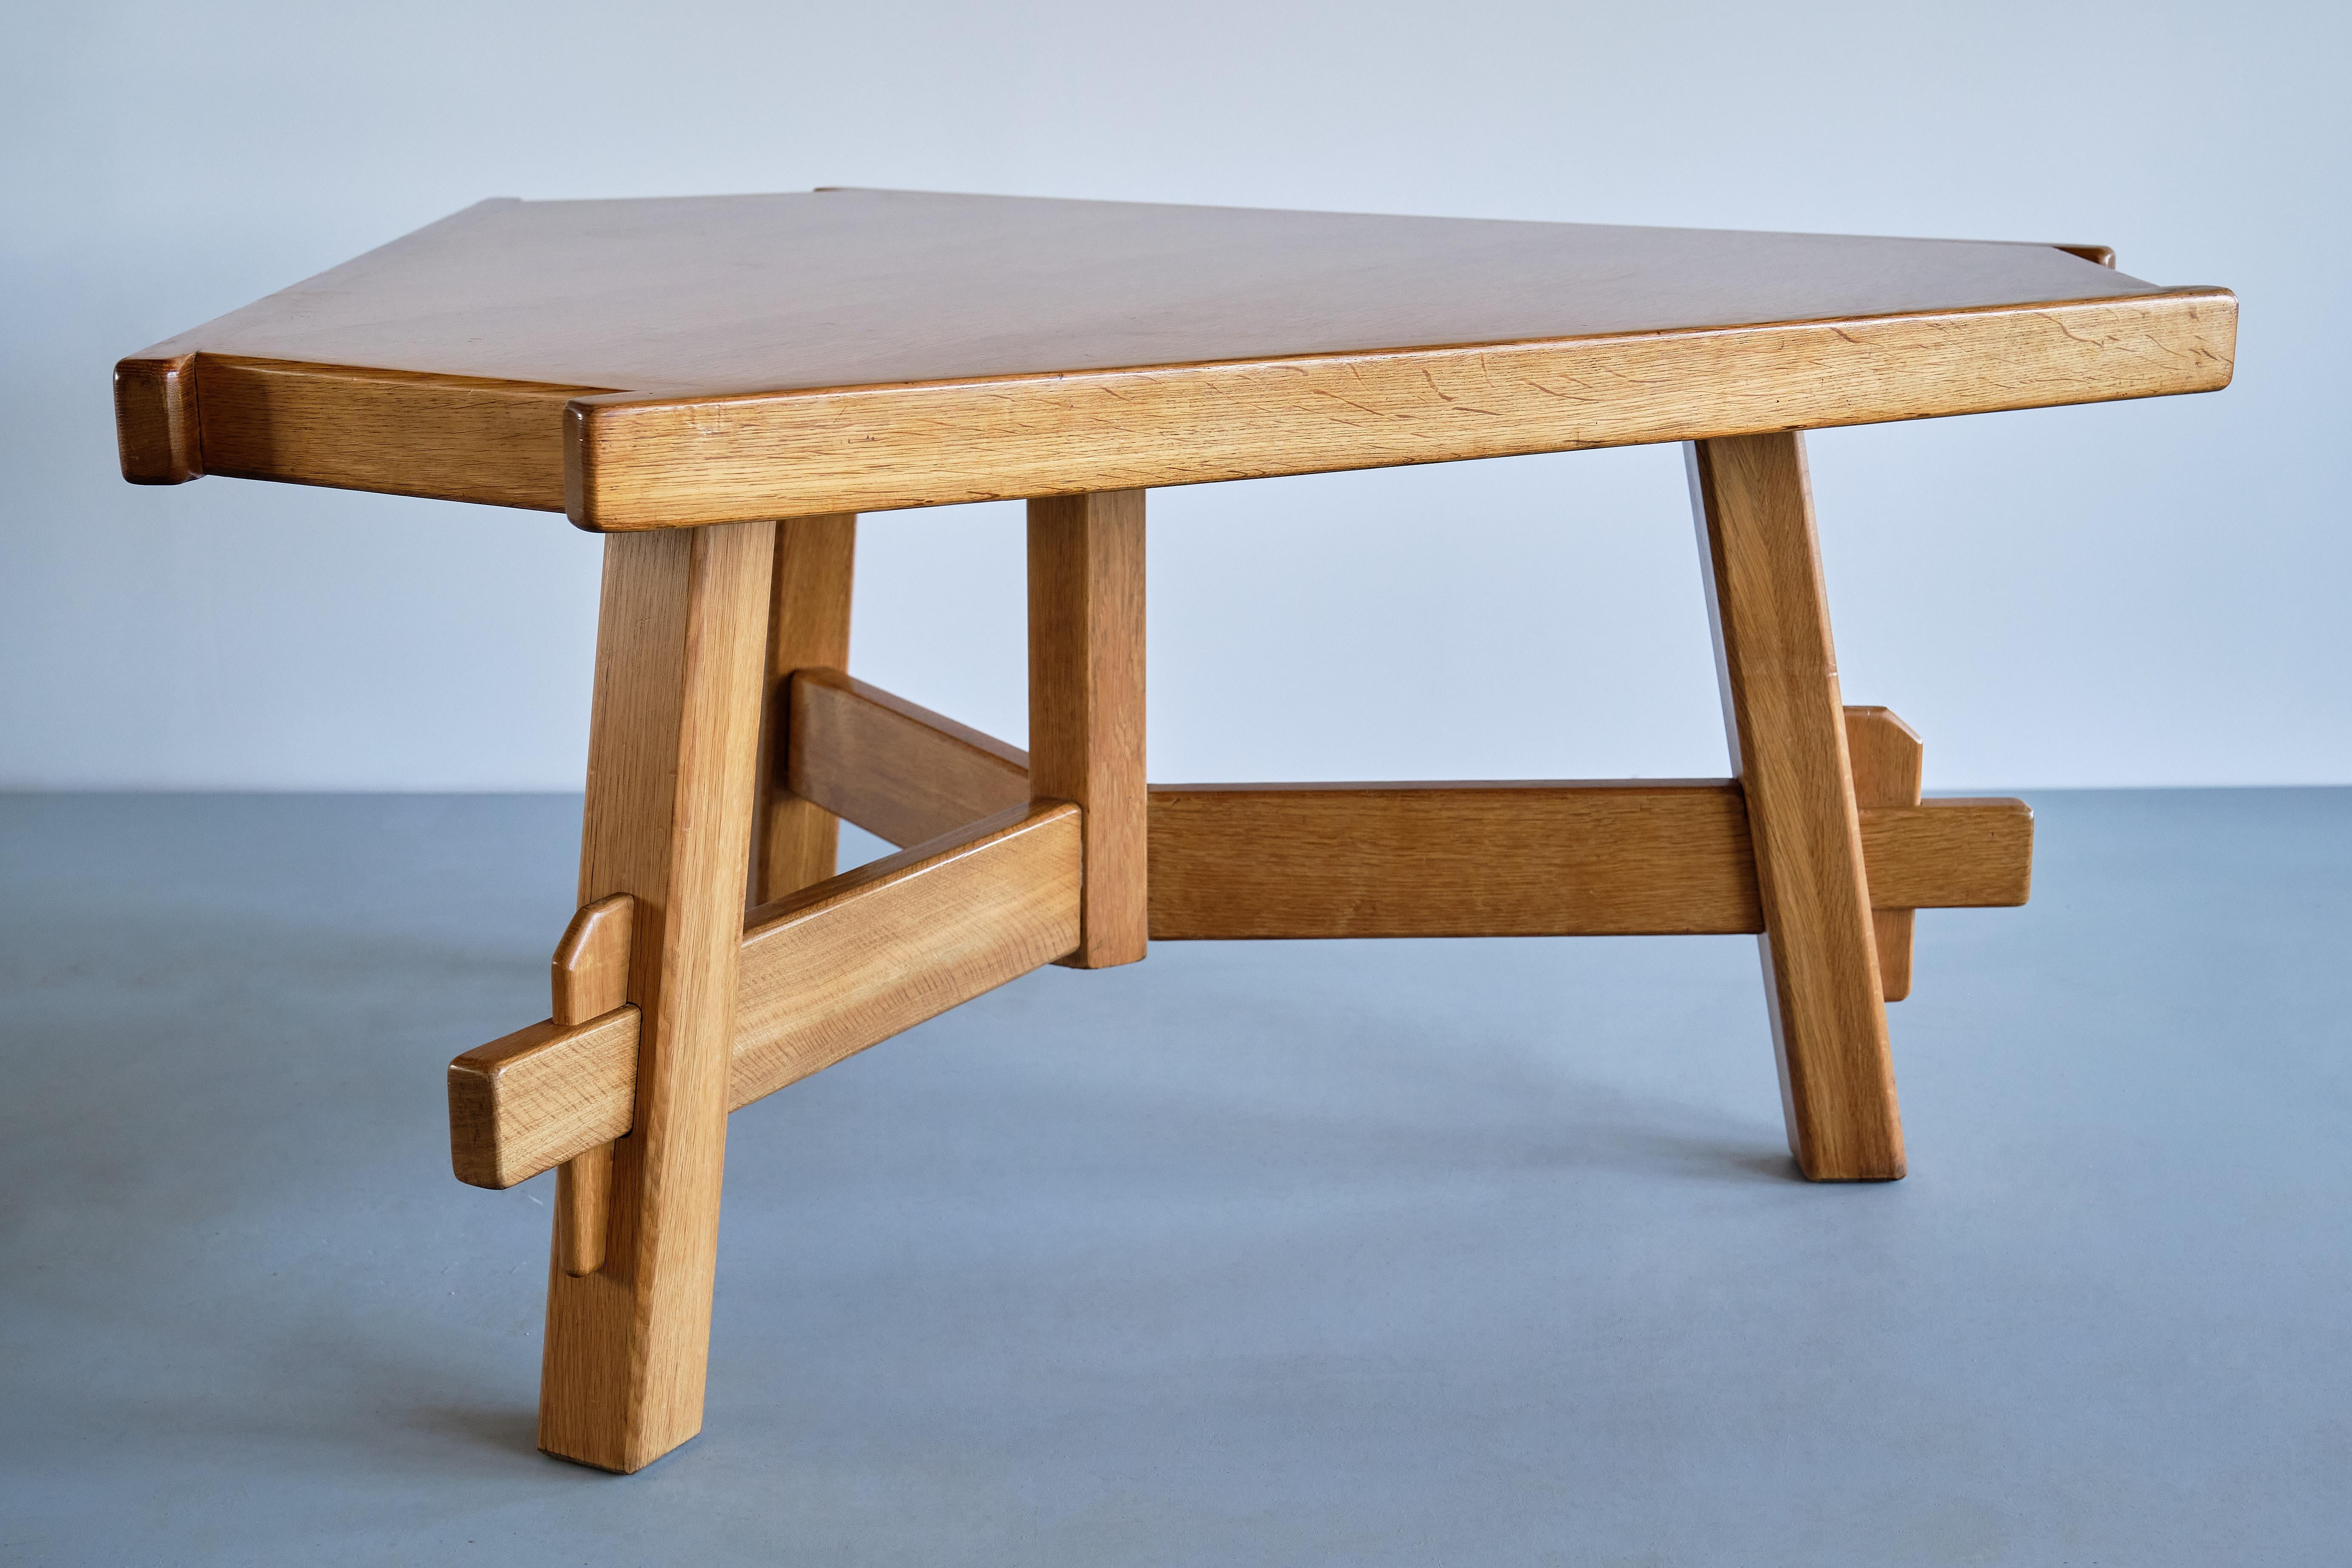 Triangular French Modern Dining Table in Solid Oak Wood, France, 1960s For Sale 5